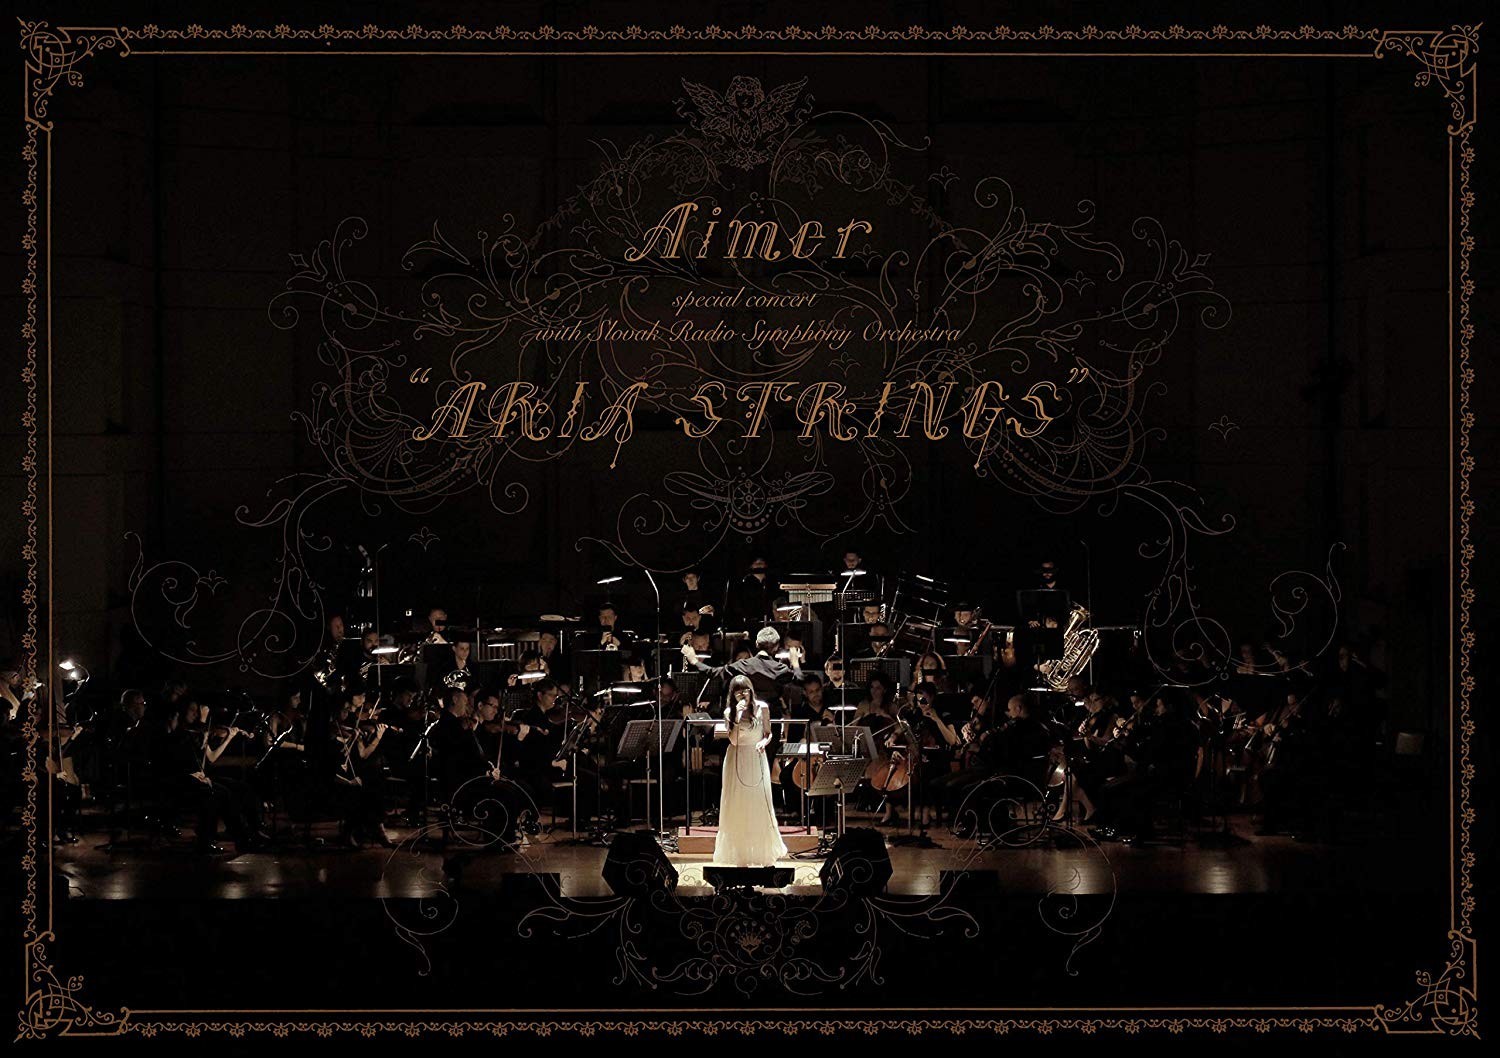 Aimer - Aimer special concert with スロヴァキア国立放送交響楽団 "ARIA STRINGS" [Blu-Ray ISO + CD FLAC]